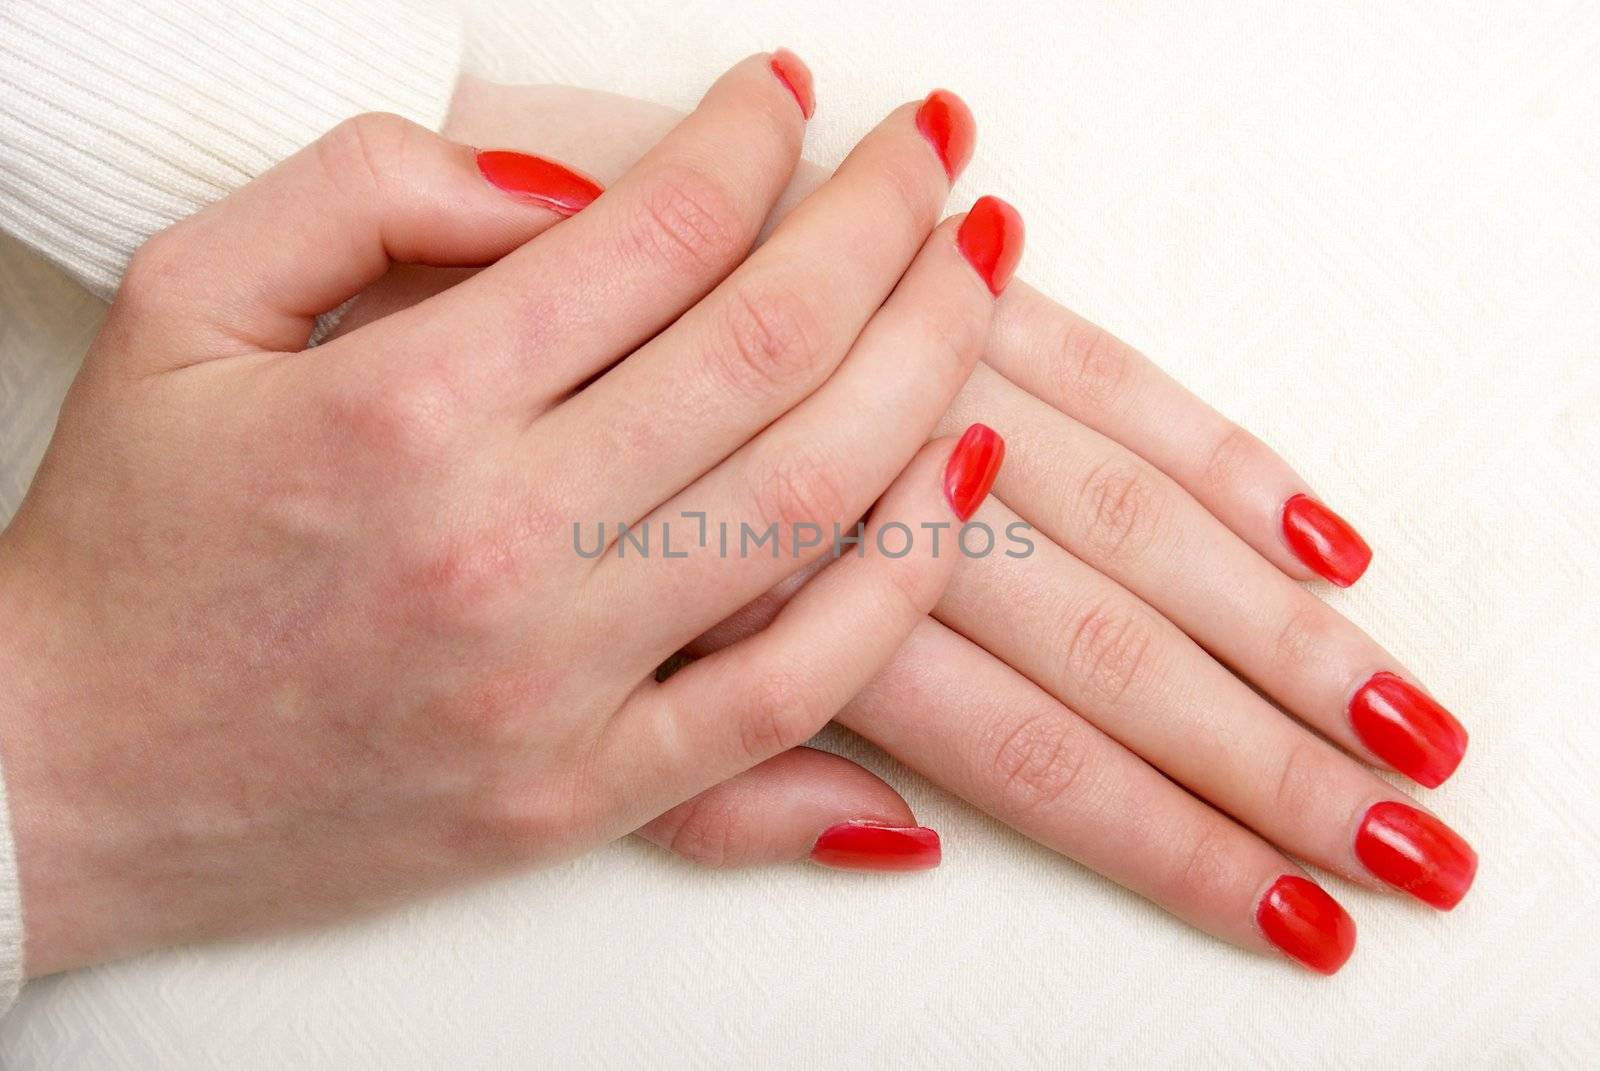 A girls freshly manicured hands pose on a pillow.